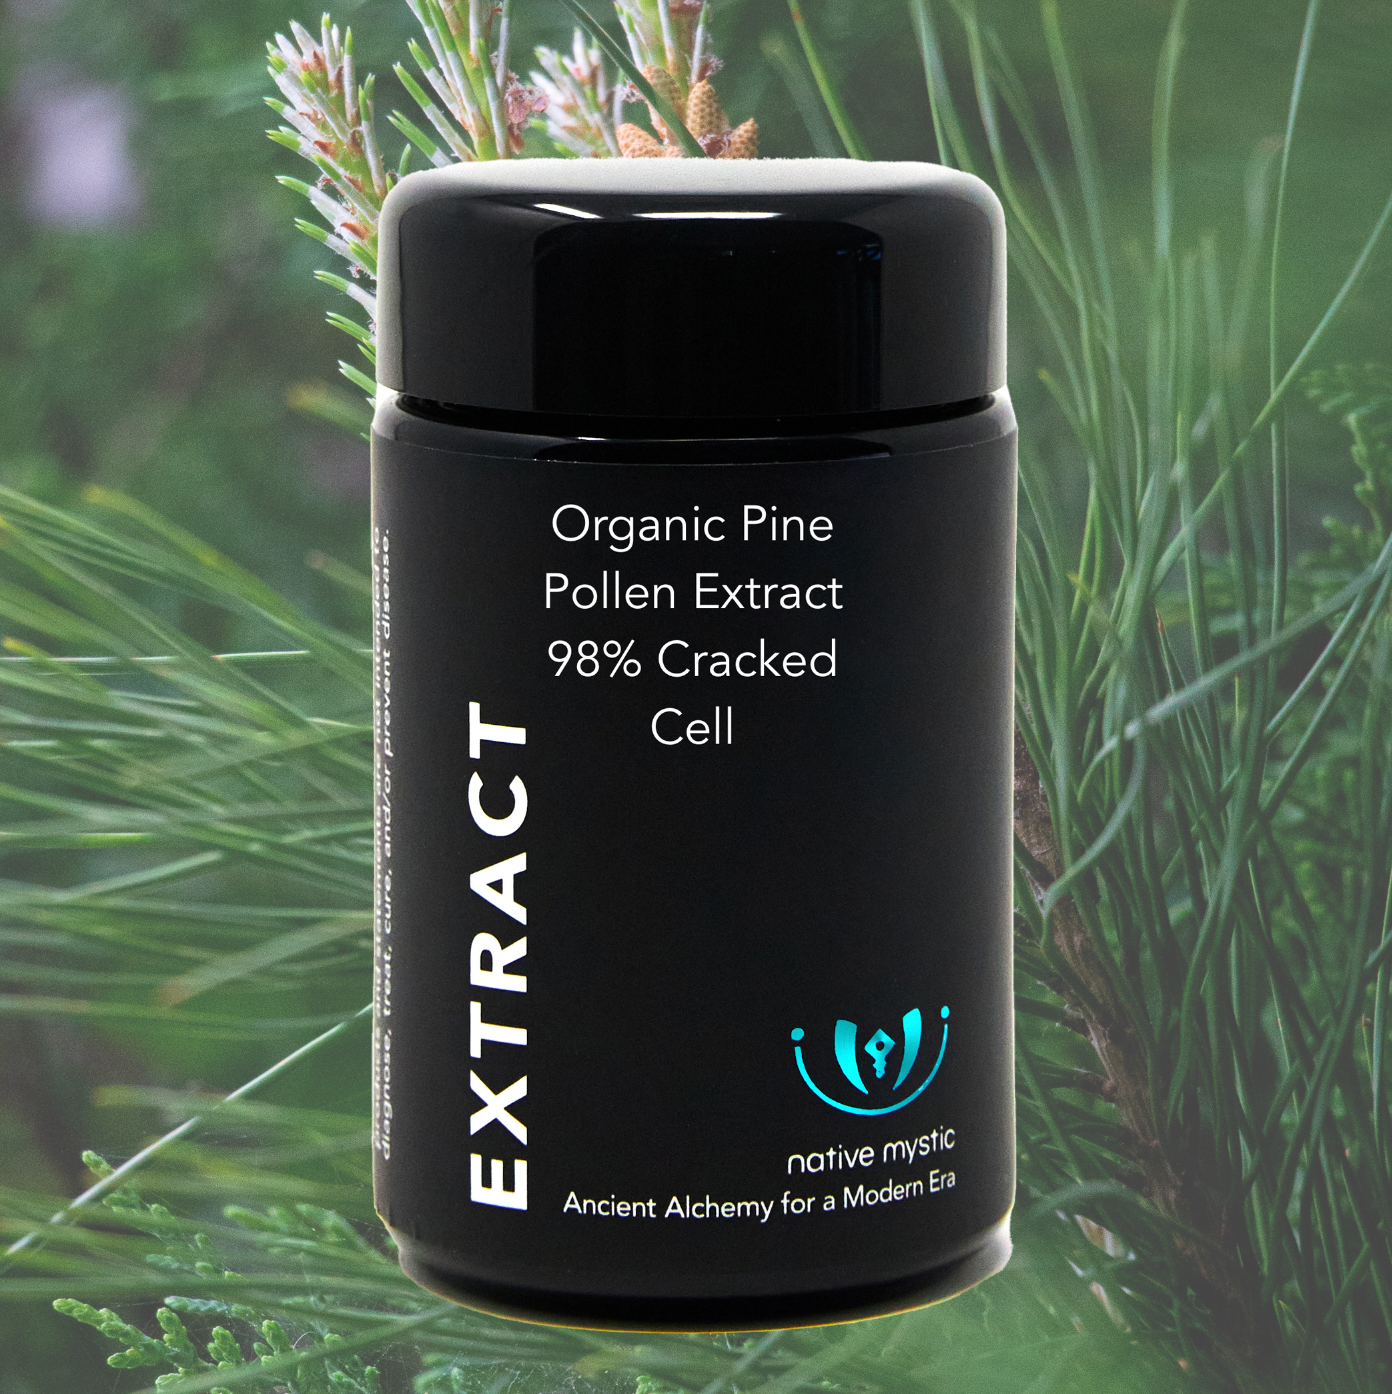 Pine Pollen Extract 10:1, 95% Cracked Cell